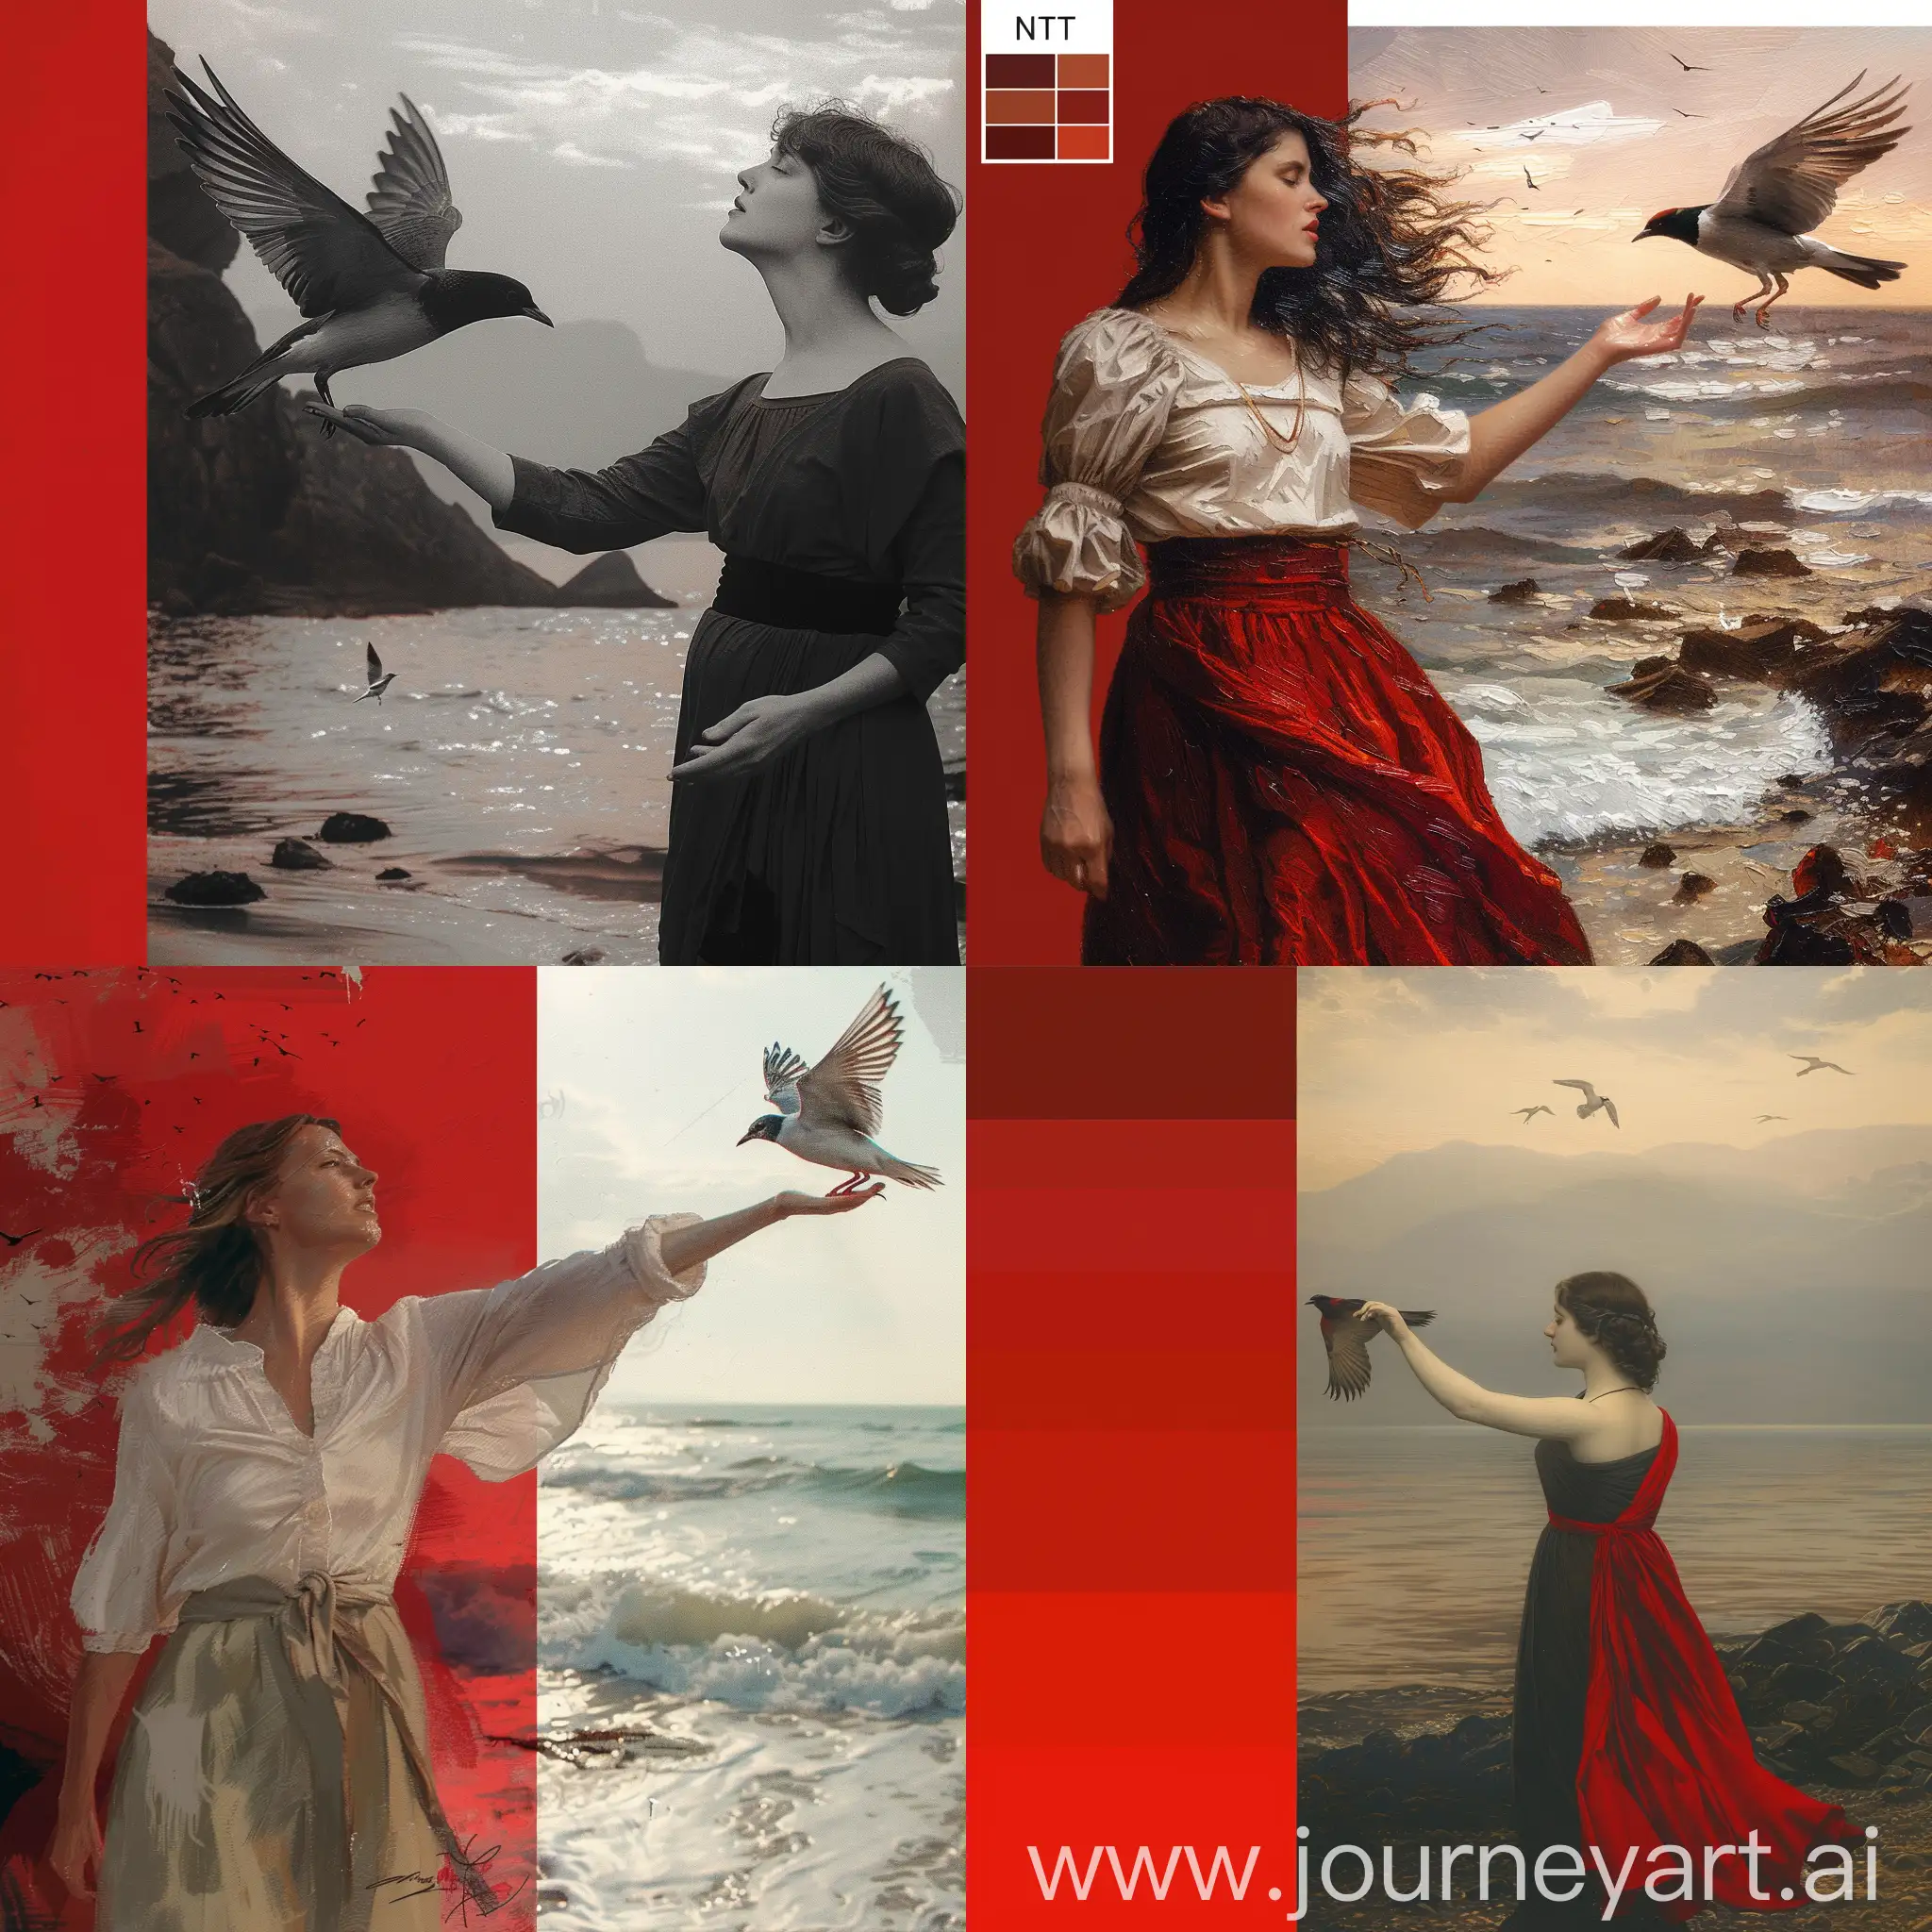 Empowering-Woman-Releasing-Bird-by-the-Sea-Digital-Painting